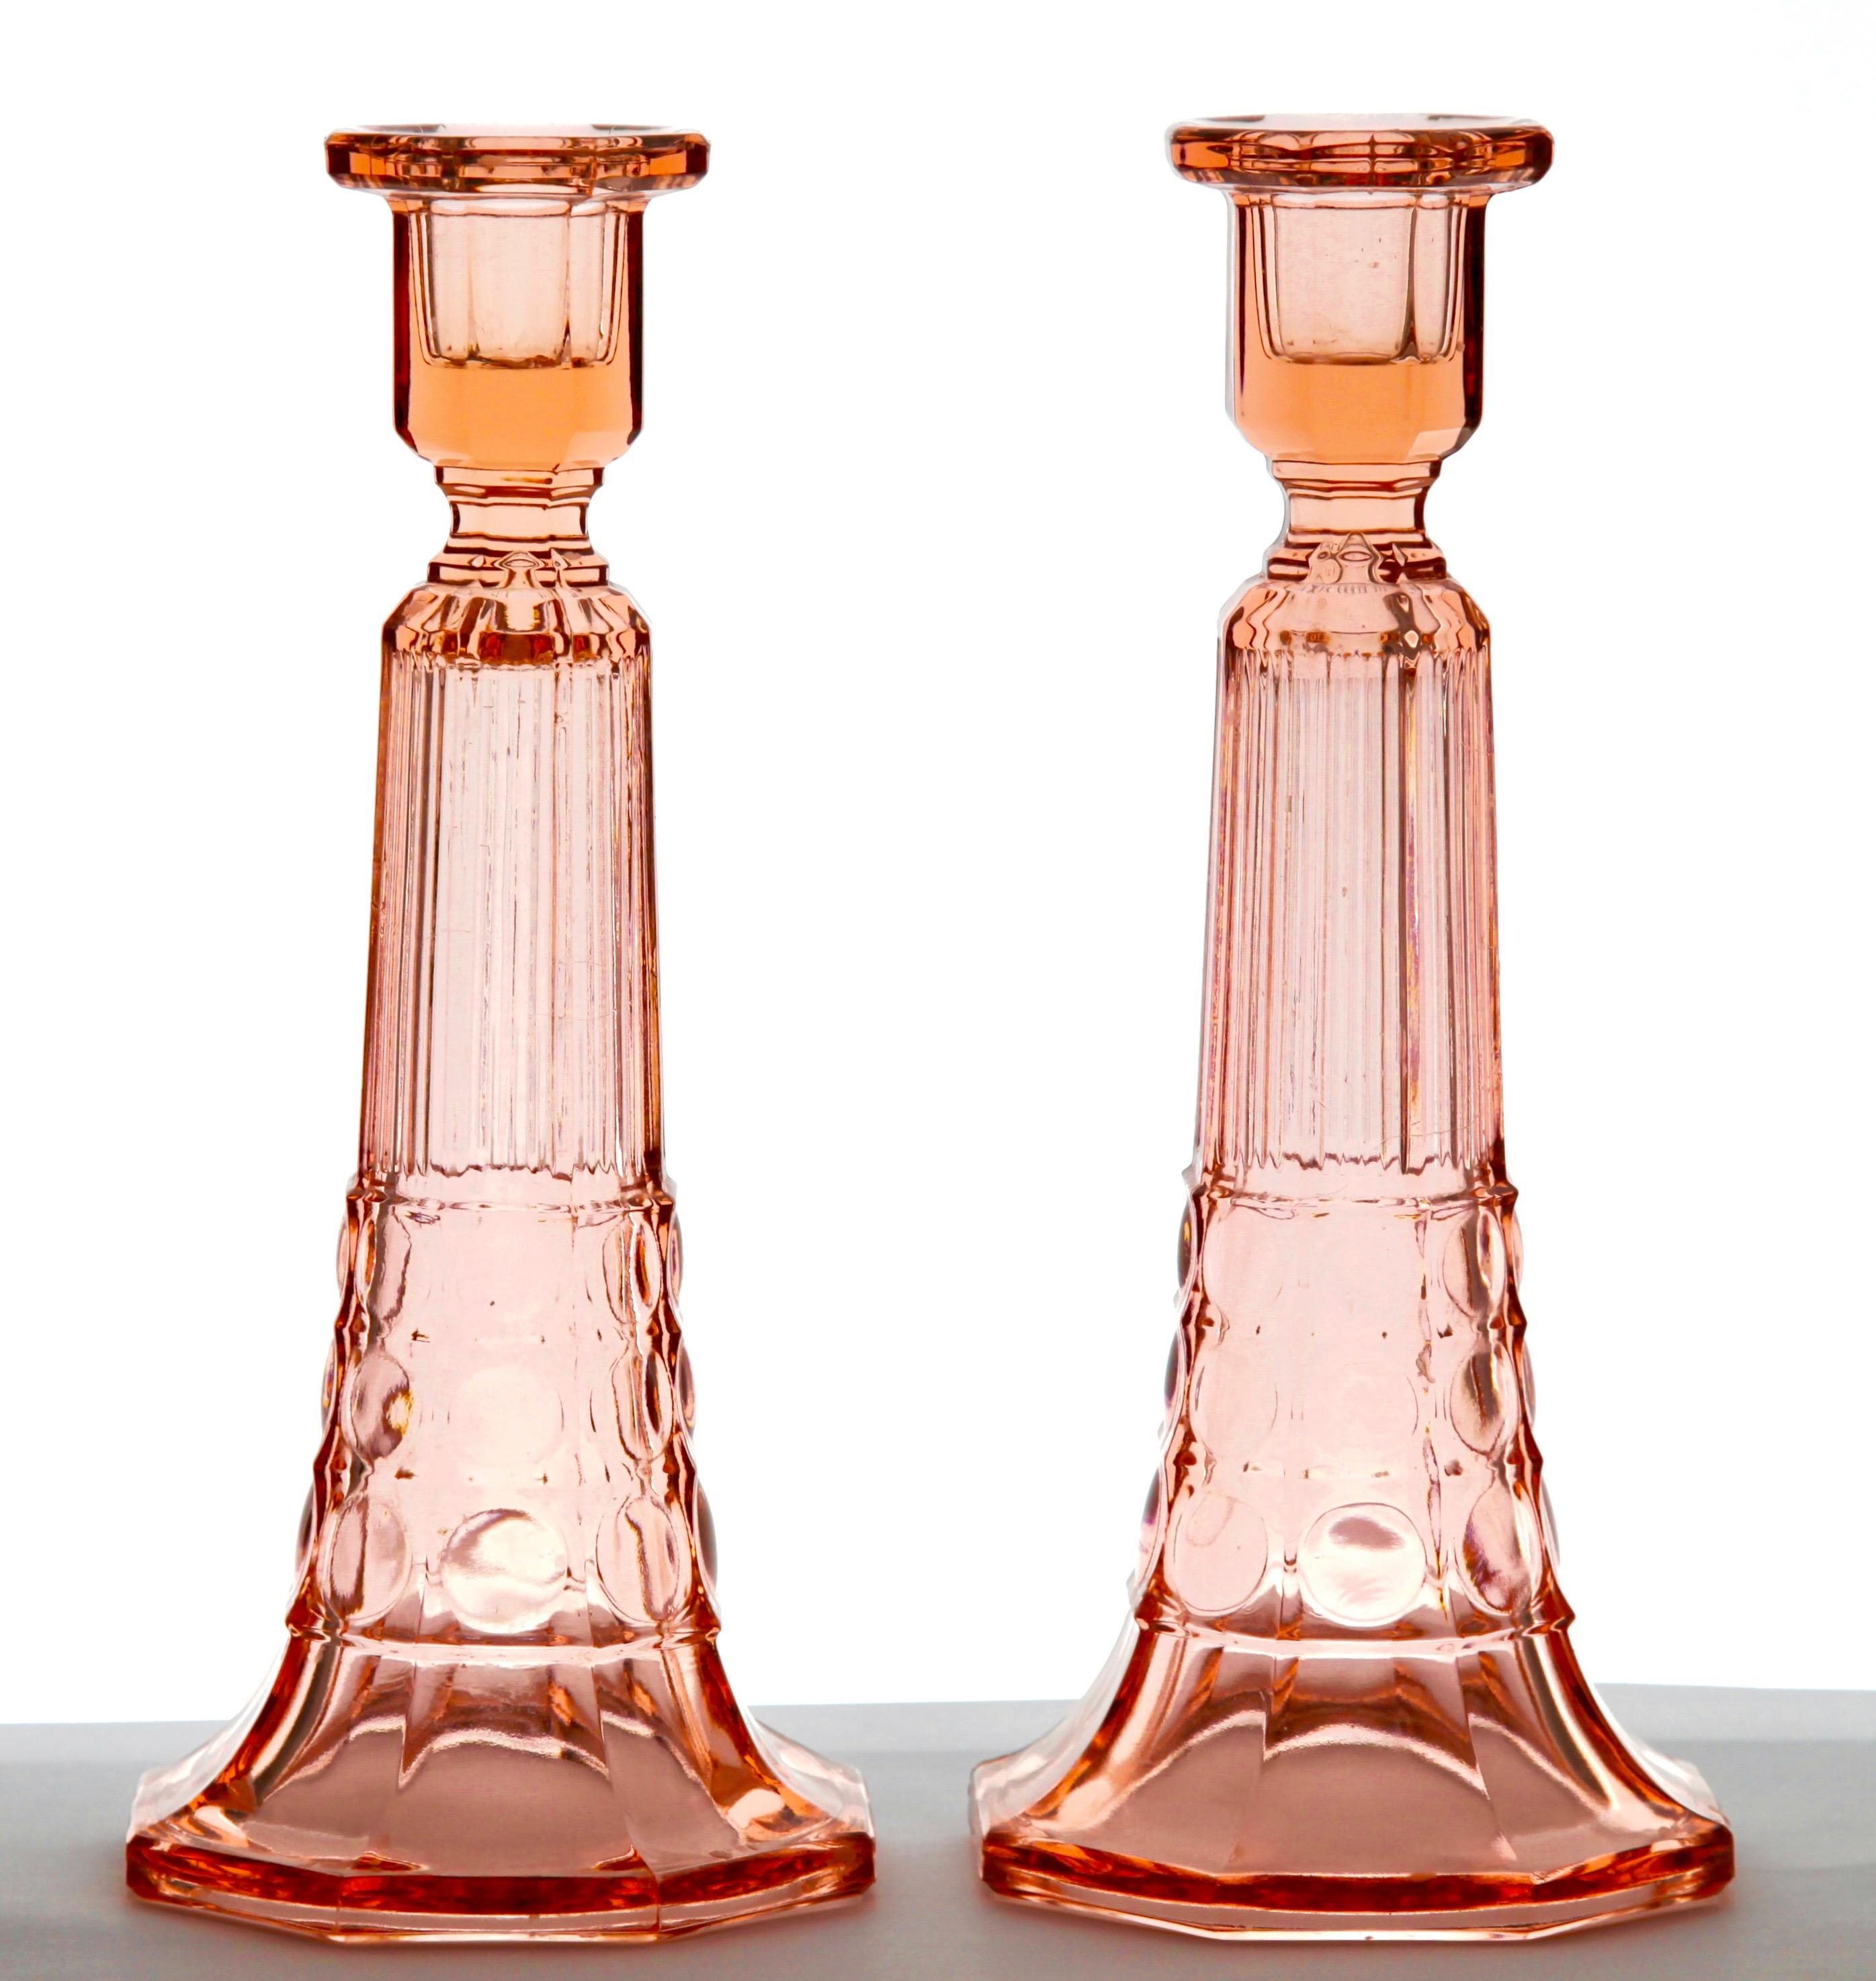 1935, Belgium
Pair of very nice Art Deco candlesticks made by Val Saint-Lambert.
From the Luxval range by Charles Graffart and René Delvenne.
Named after European monarchs, the smaller design is called 'Victoria' and the taller one 'Edward